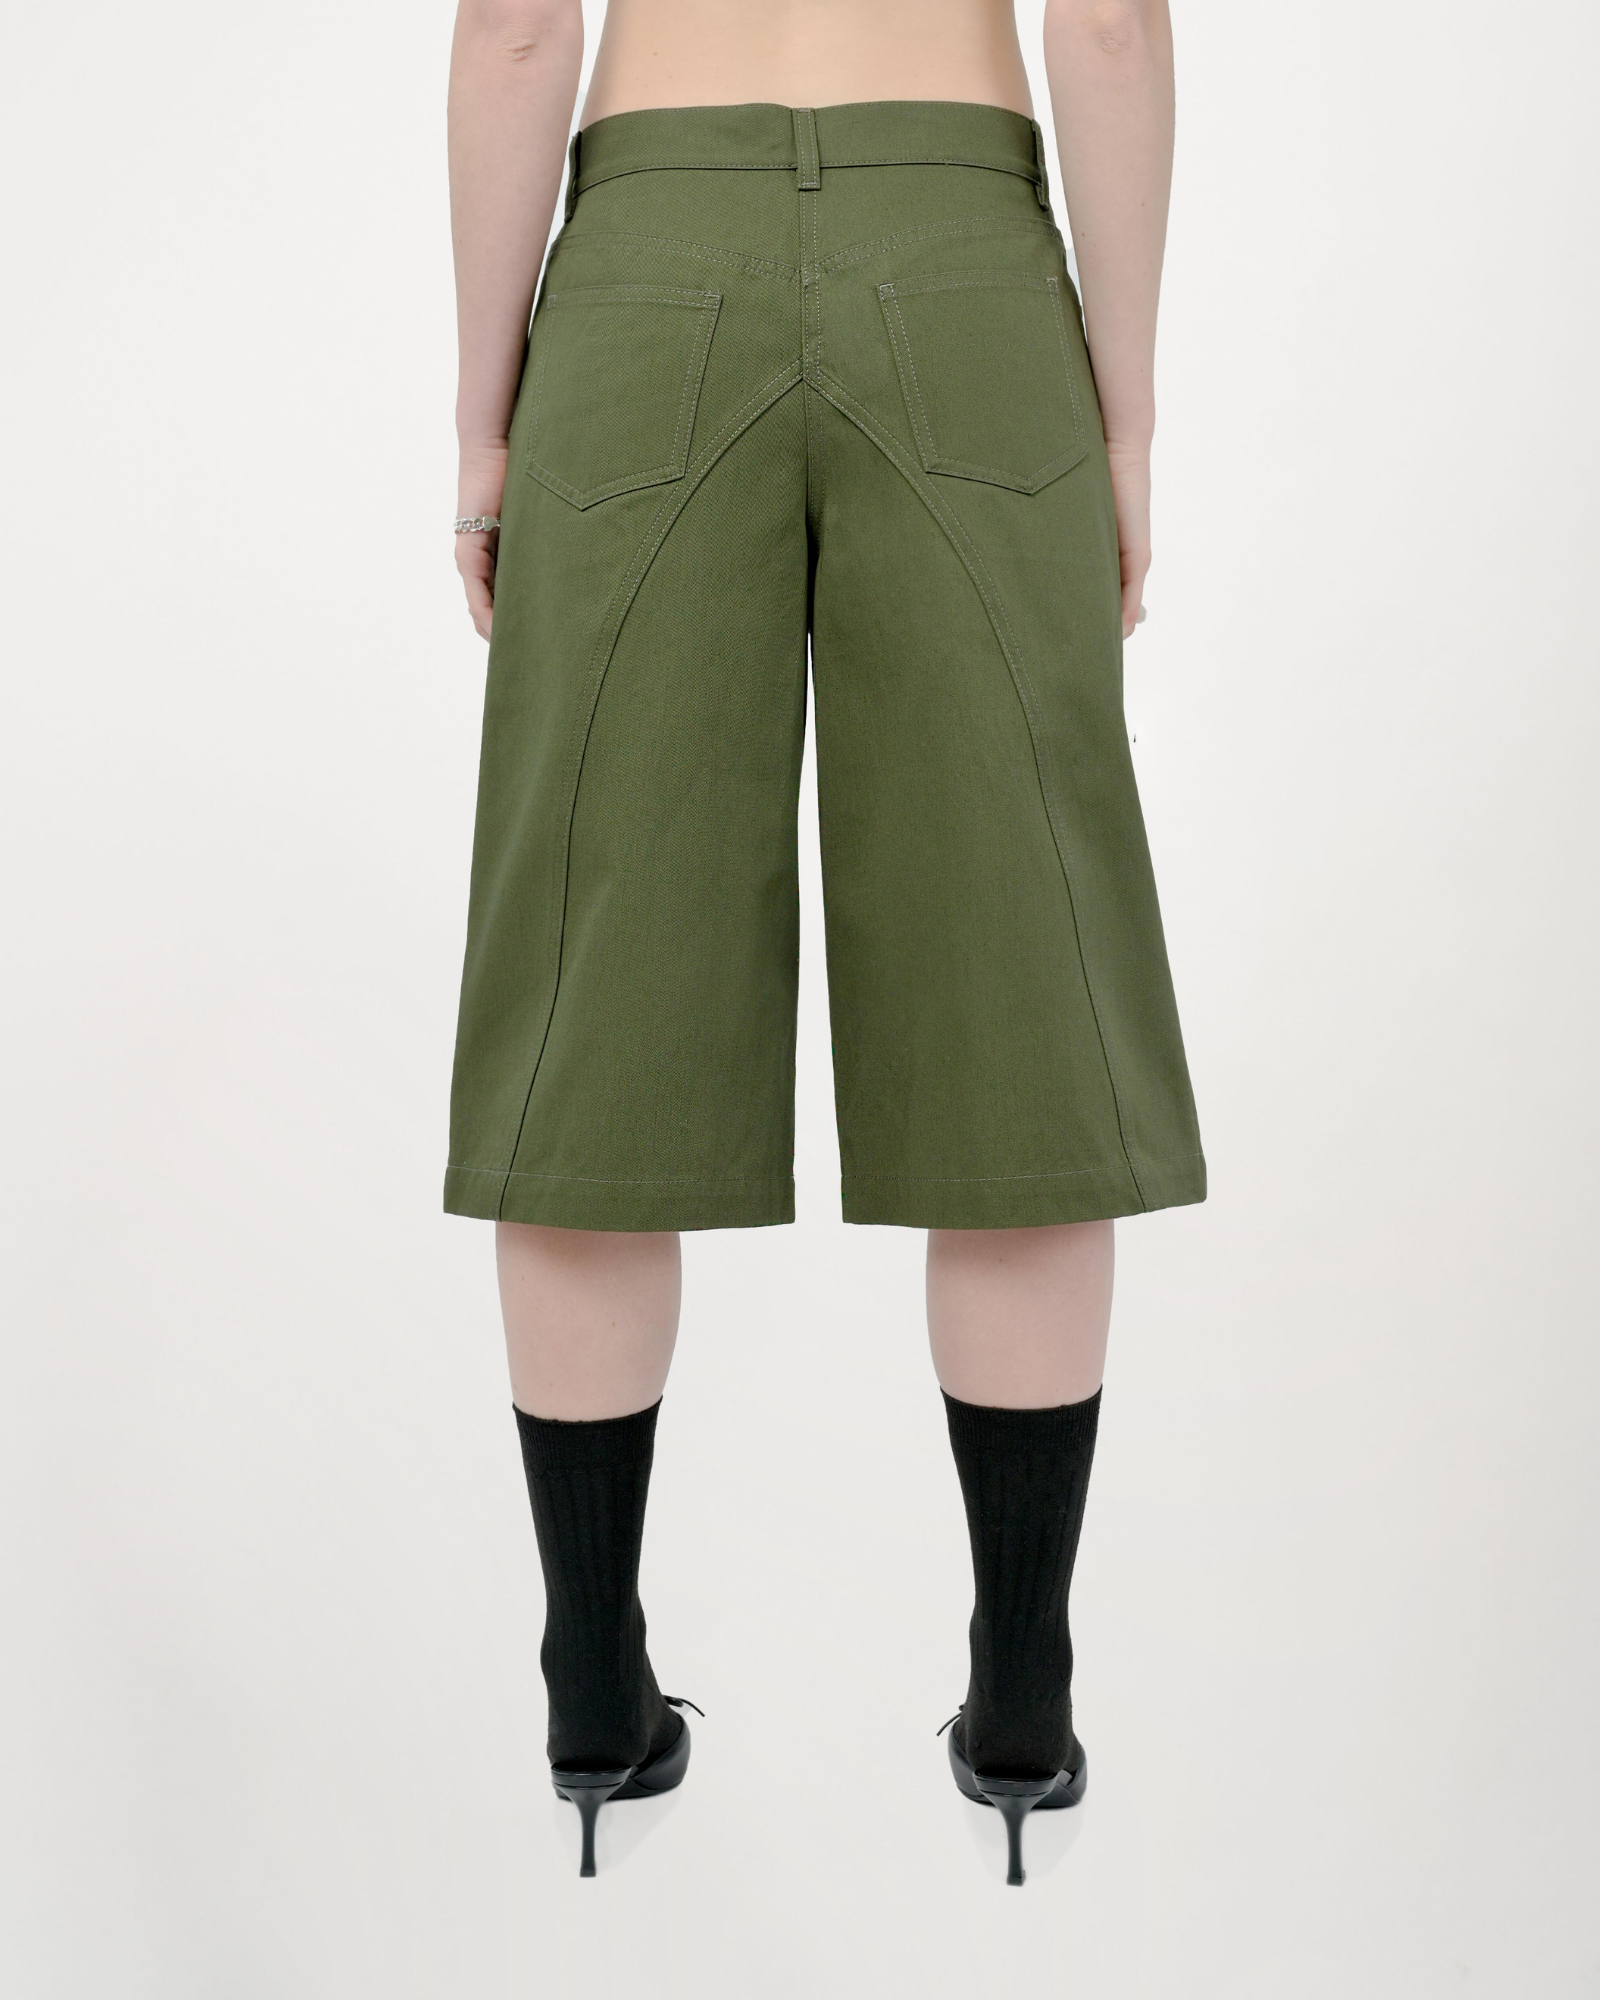 Back View of Wide-leg Tommi Short in Military Olive Green by Aseye Studio